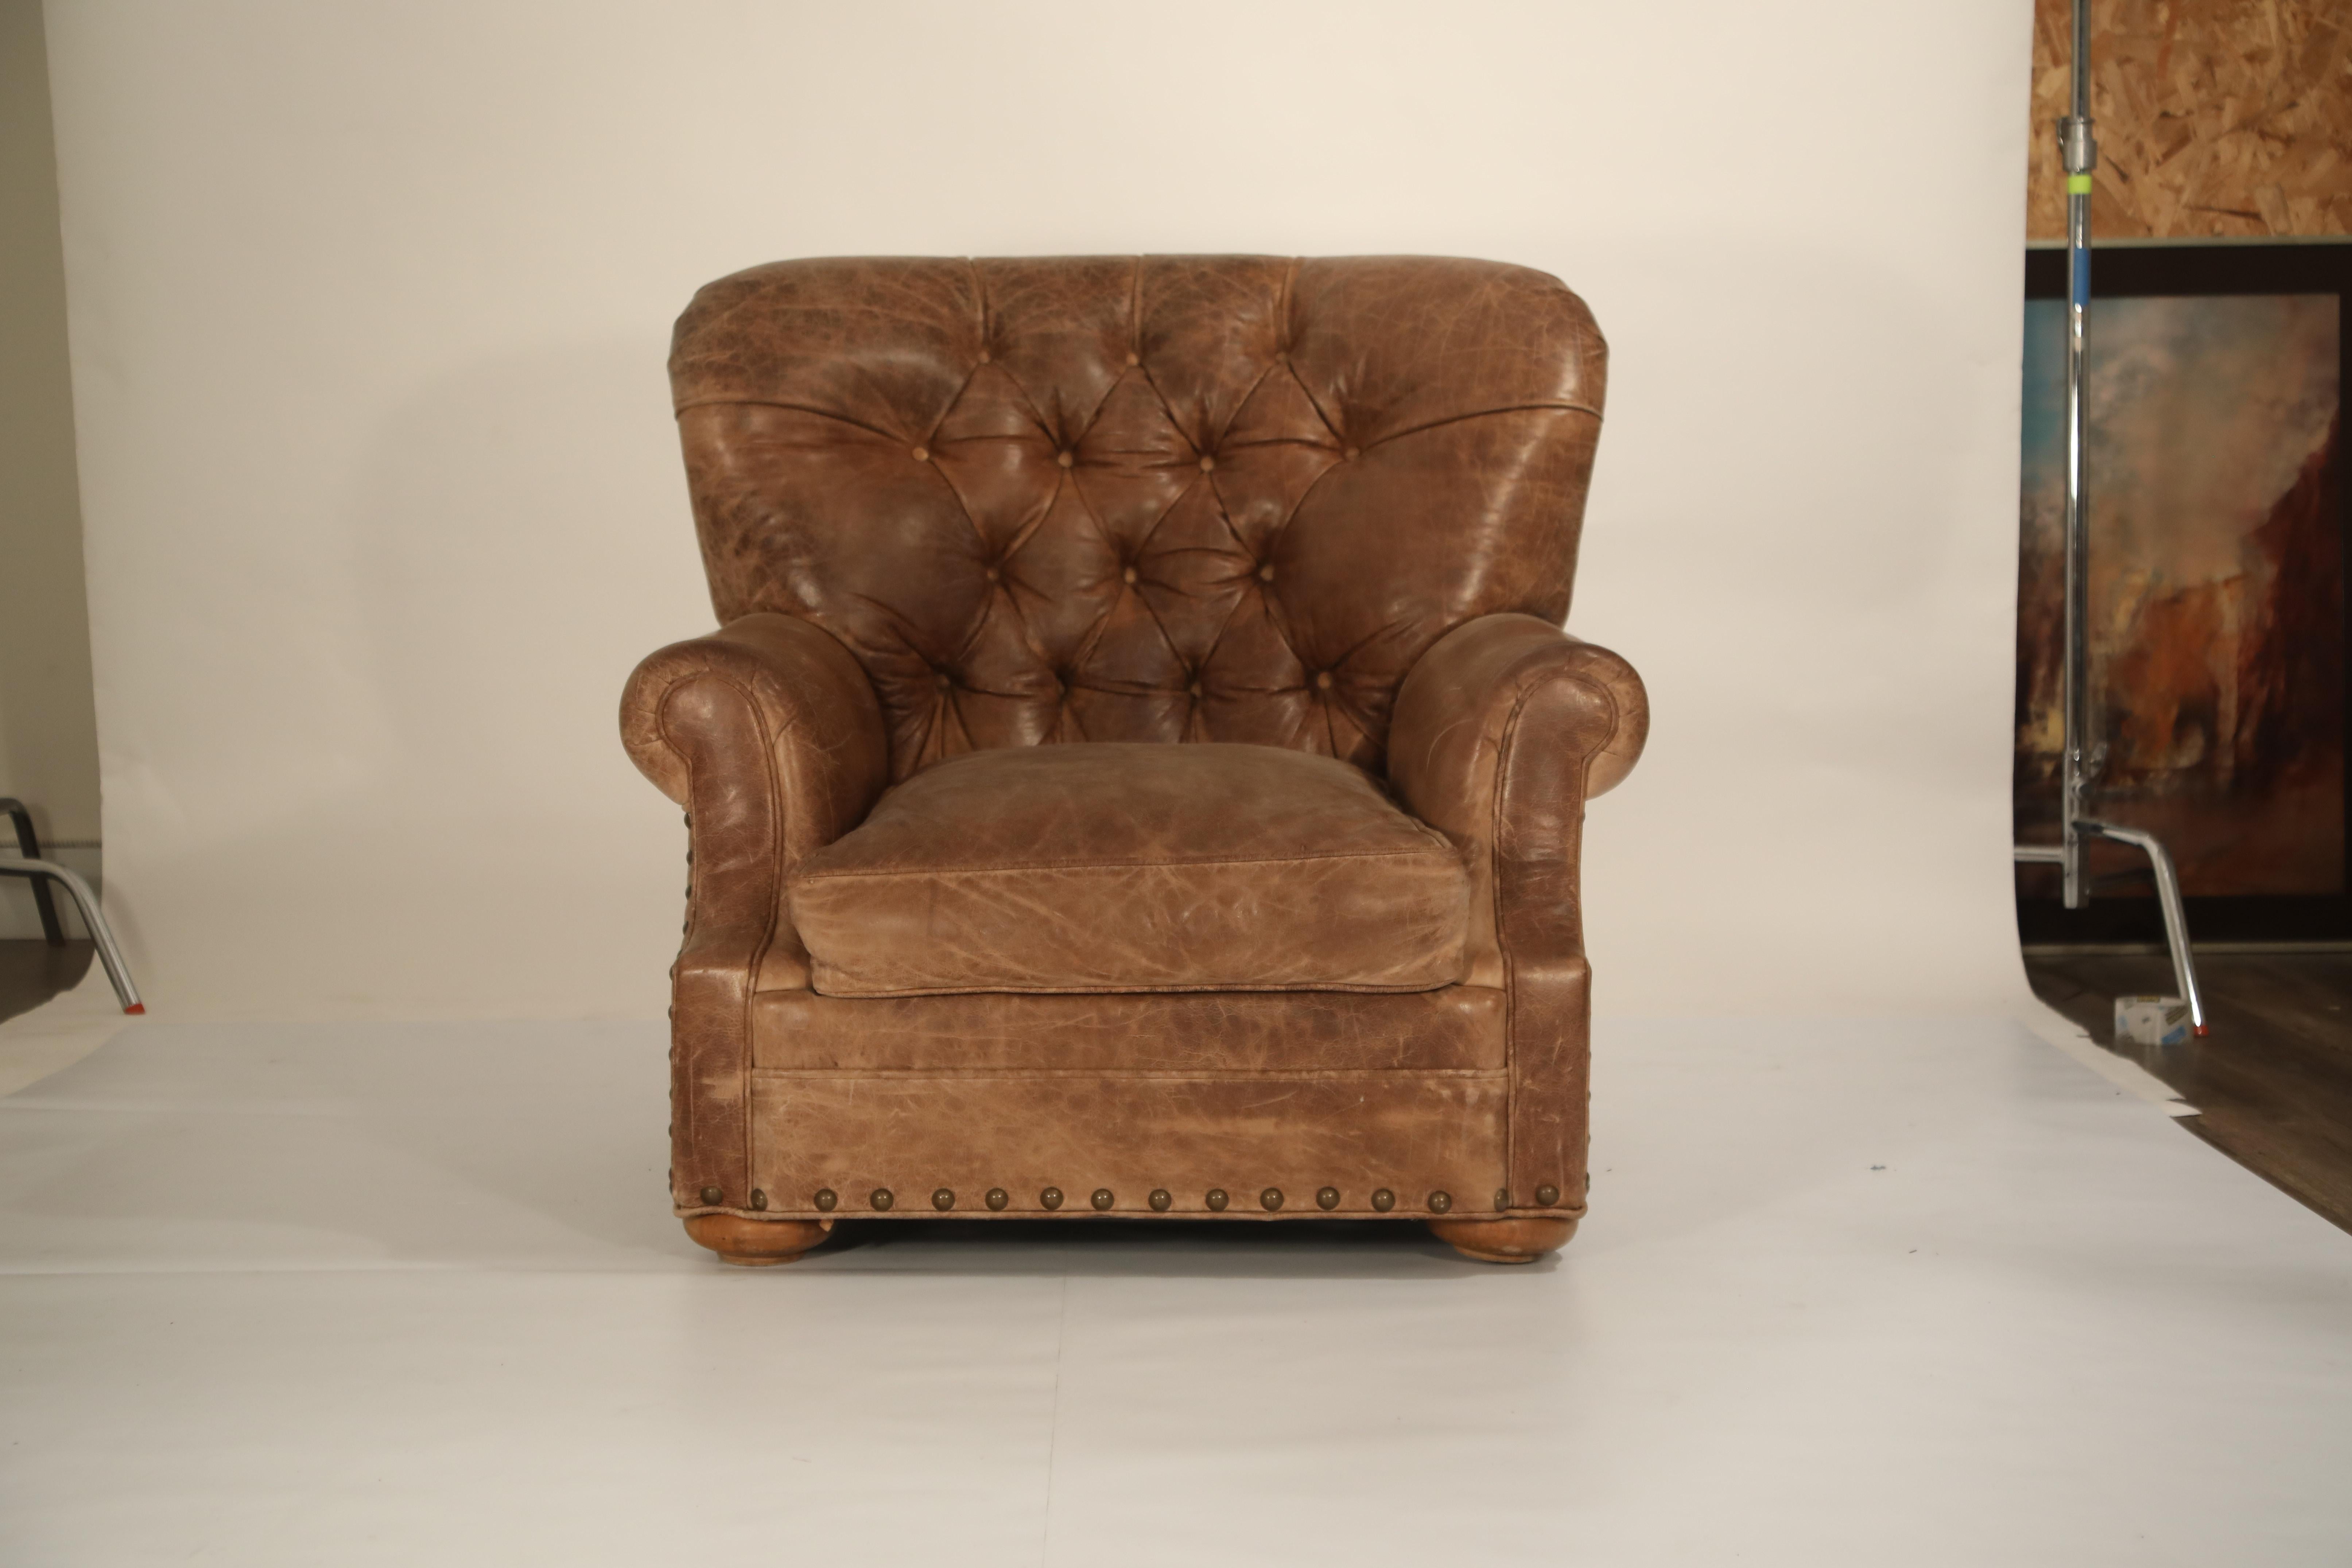 Handsome leather armchair and ottoman pairing in the style of Ralph Lauren's 